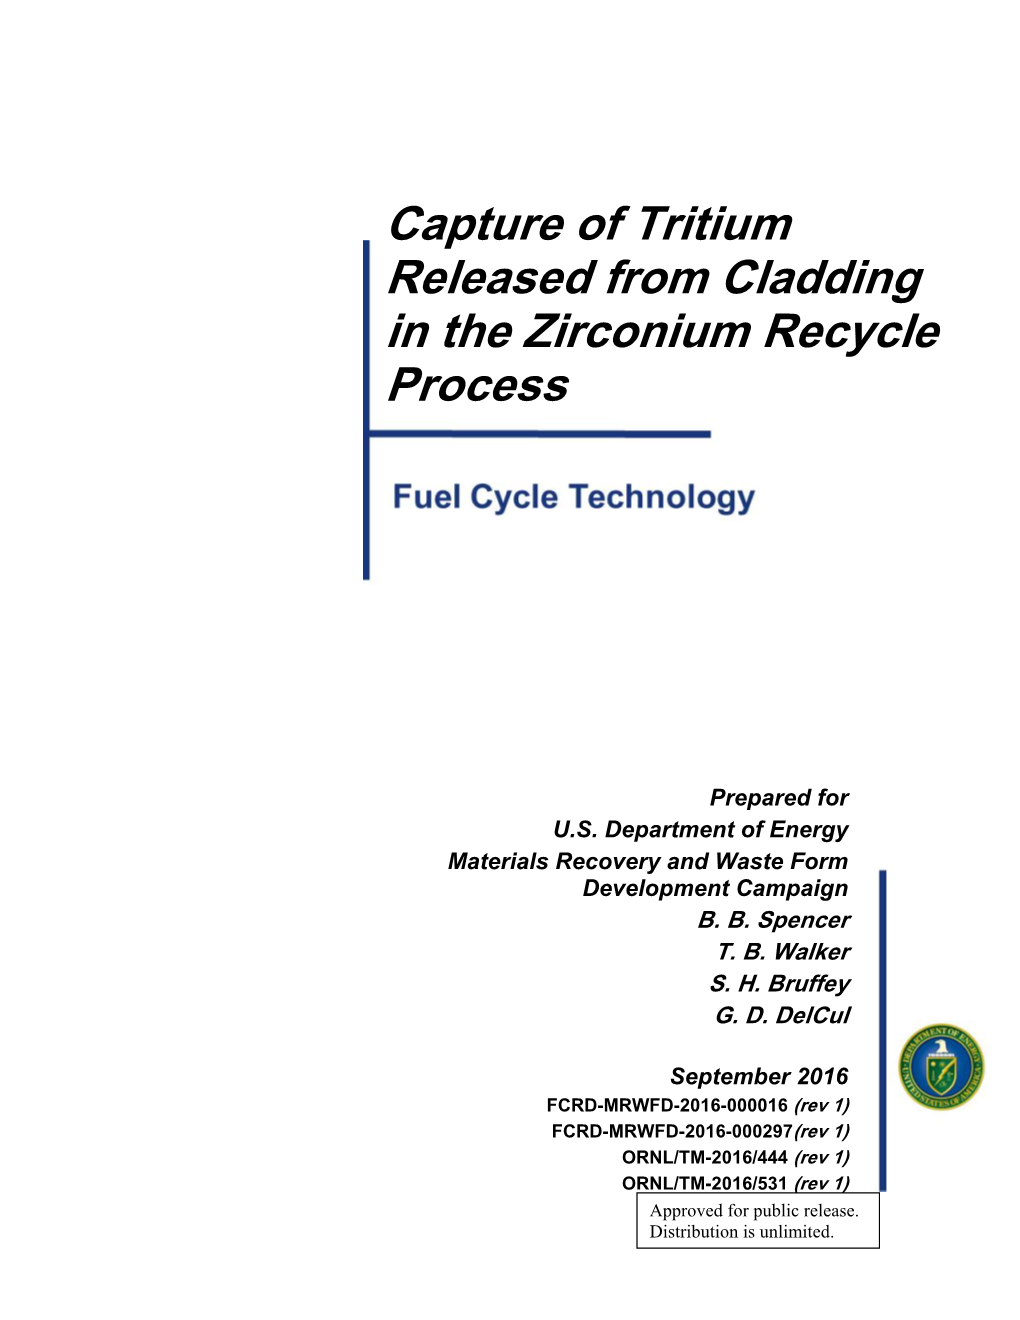 Capture of Tritium Released from Cladding in the Zirconium Recycle Process